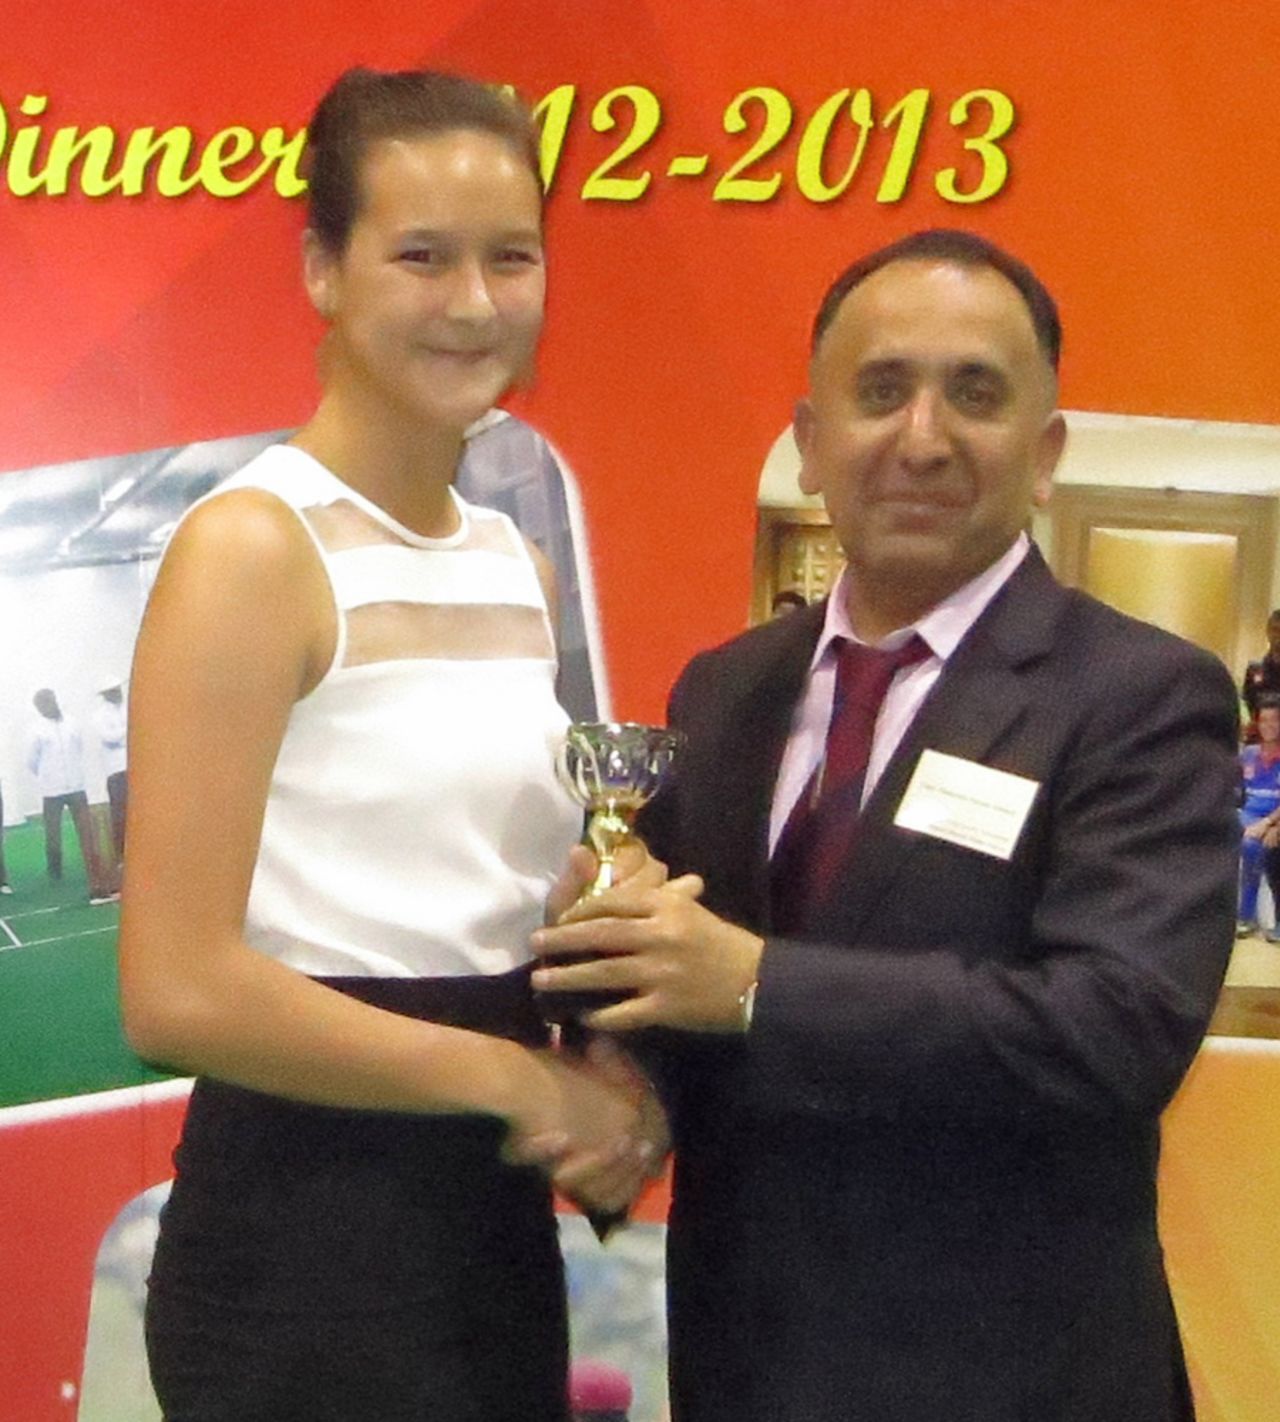 Mariko Hill collects her Hong Kong Woman Cricketer of the Year trophy from outgoing HKCA President Capt. Saleem Ahmed Shahzada at the HKCA 2012-13 Awards Dinner at Kowloon Cricket Club on 5th June 2013